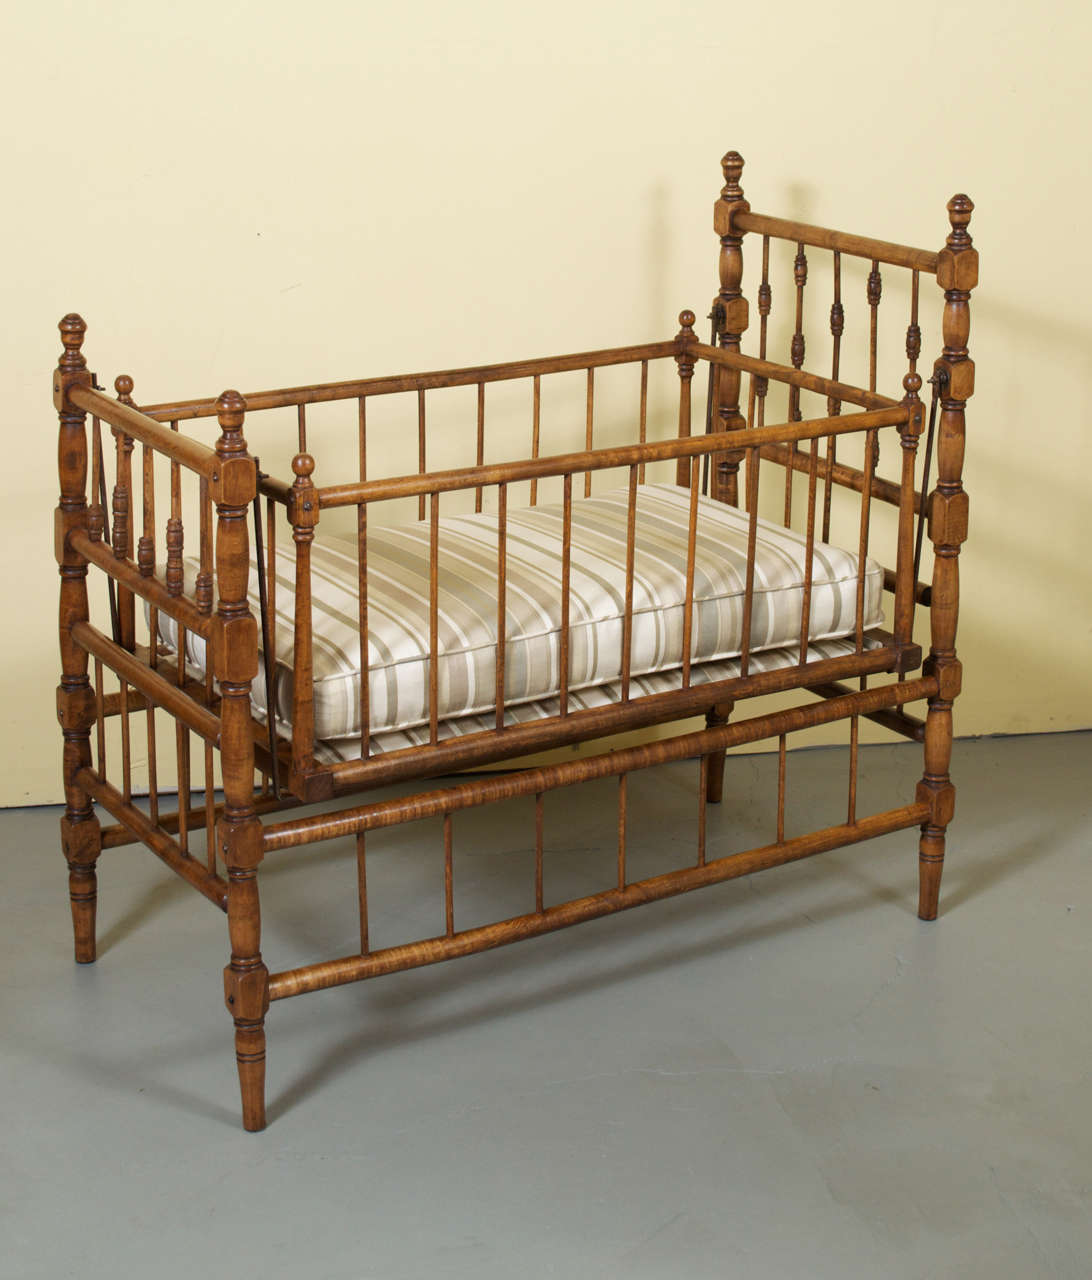 A gorgeous country French swinging cradle with removable upholstered cushion. The swinging part of the cradle has nine wooden spindles on two sides and five wooden spindles on the other two sides. There are four steel rods, one in each corner, that